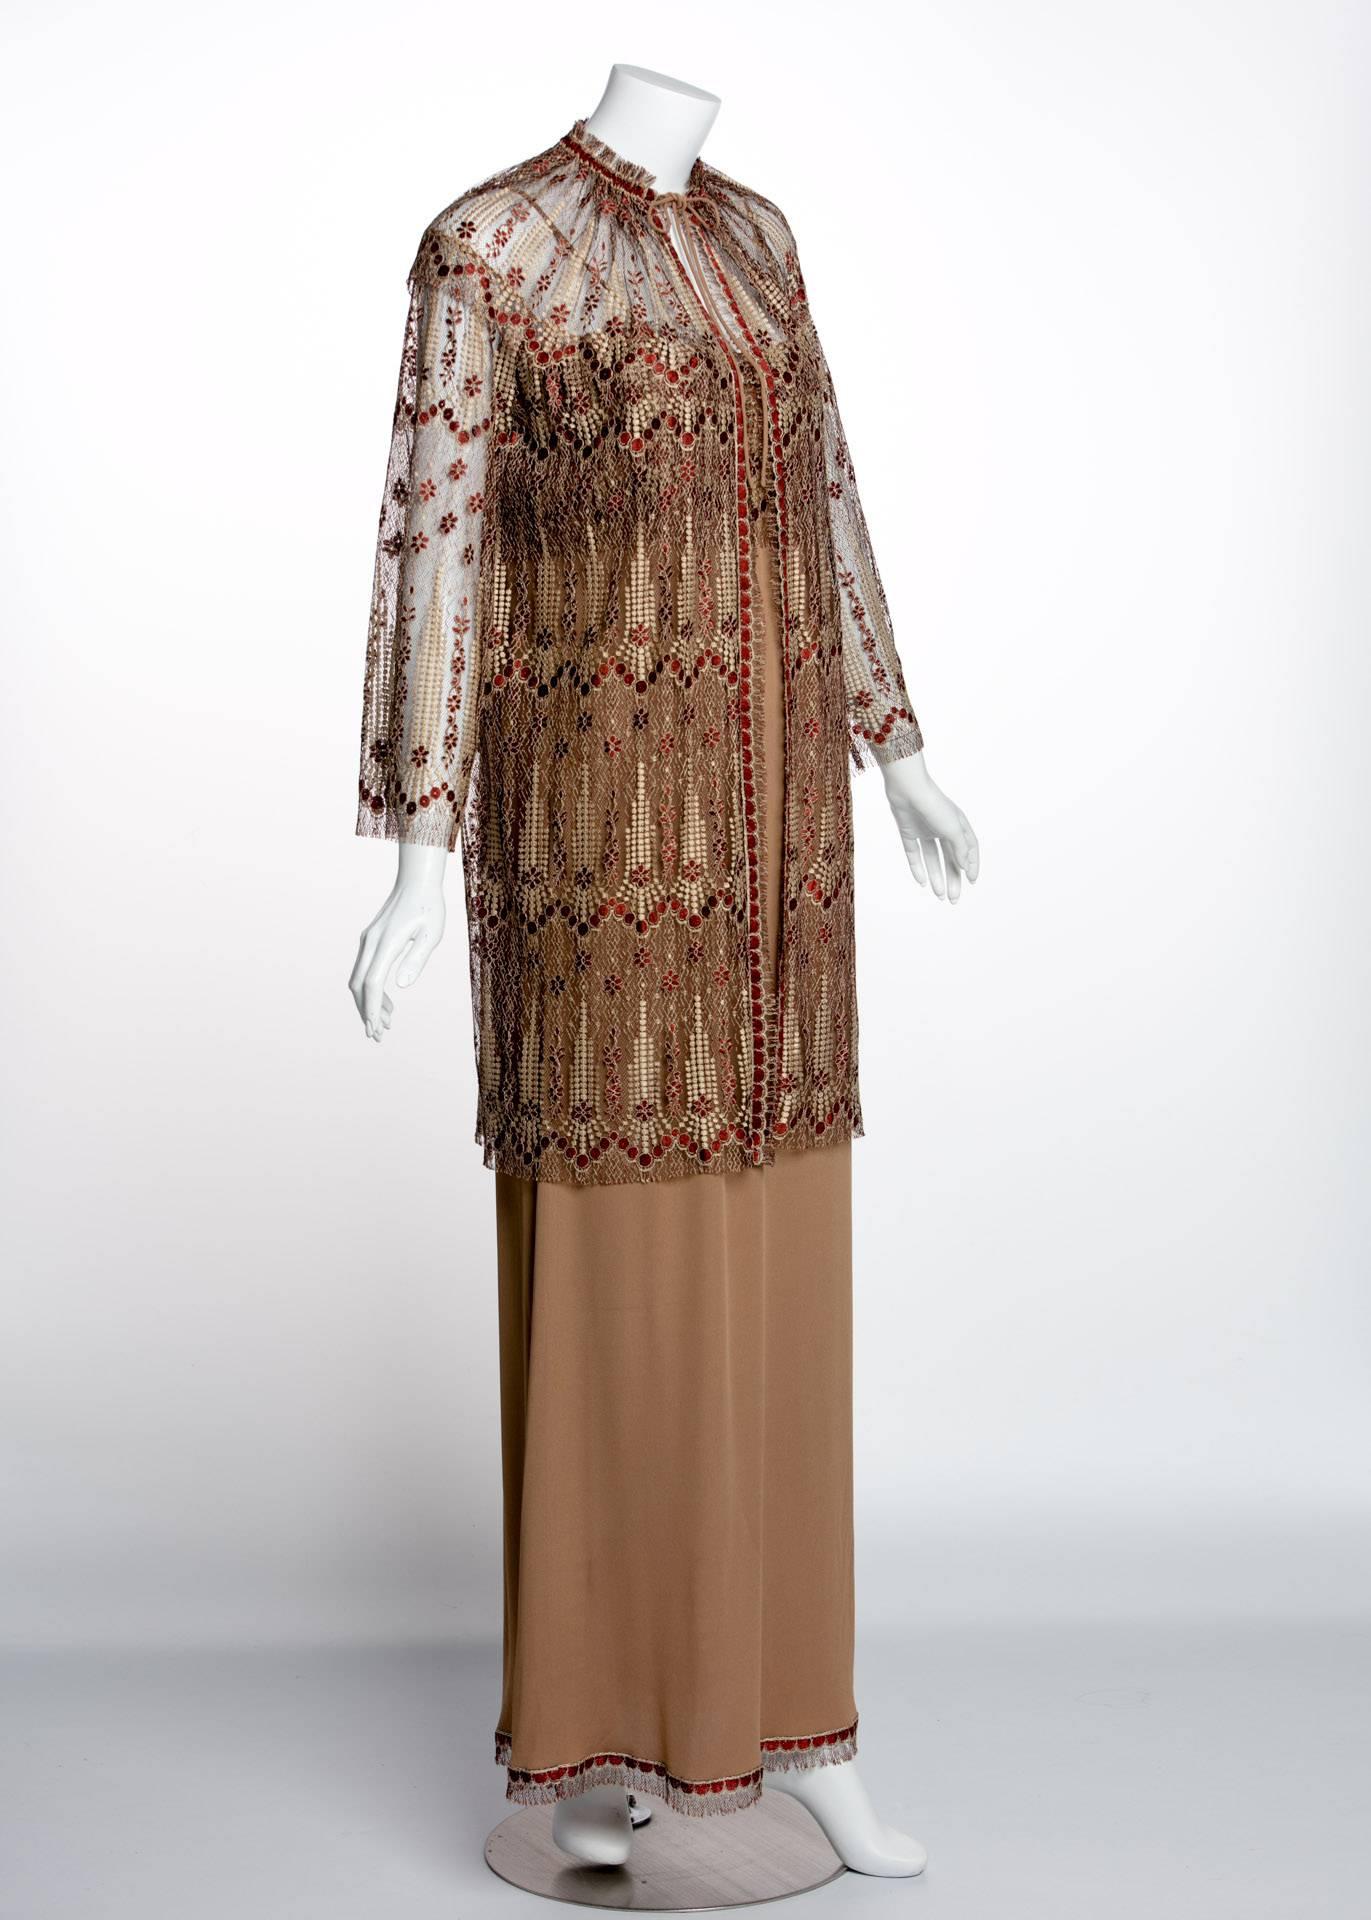 London based designer Janice Wainwright dabbled in vibrancy and Victoriana. A mainstay on the British ready-to-wear stage during the later 1970s, Wainwright’s garments were known for their graceful fabrics and femininity. This golden-beige brown